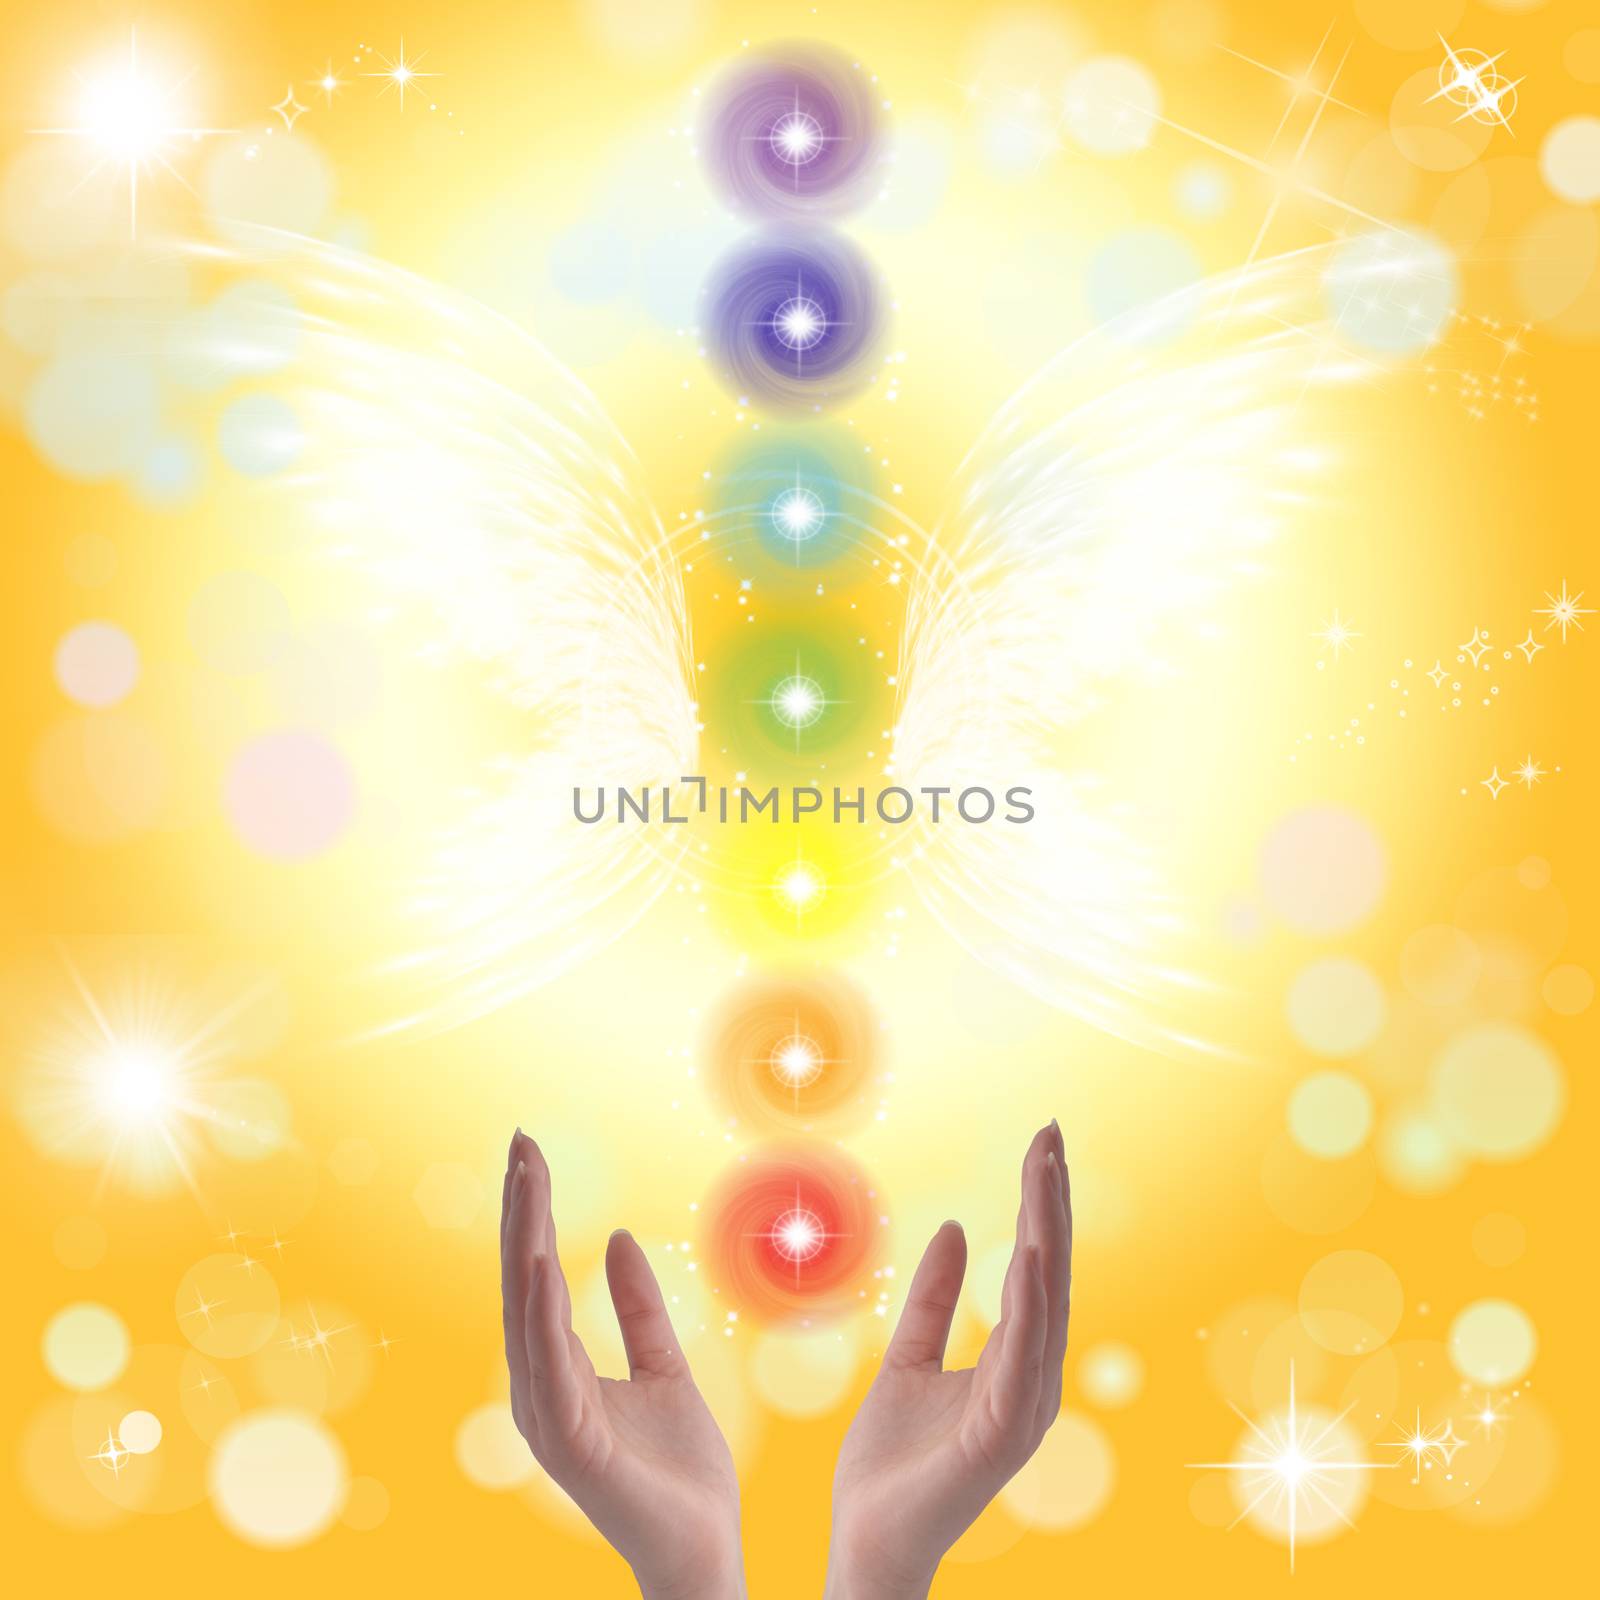 Healing hands and seven chakras on a sky background with rainbow